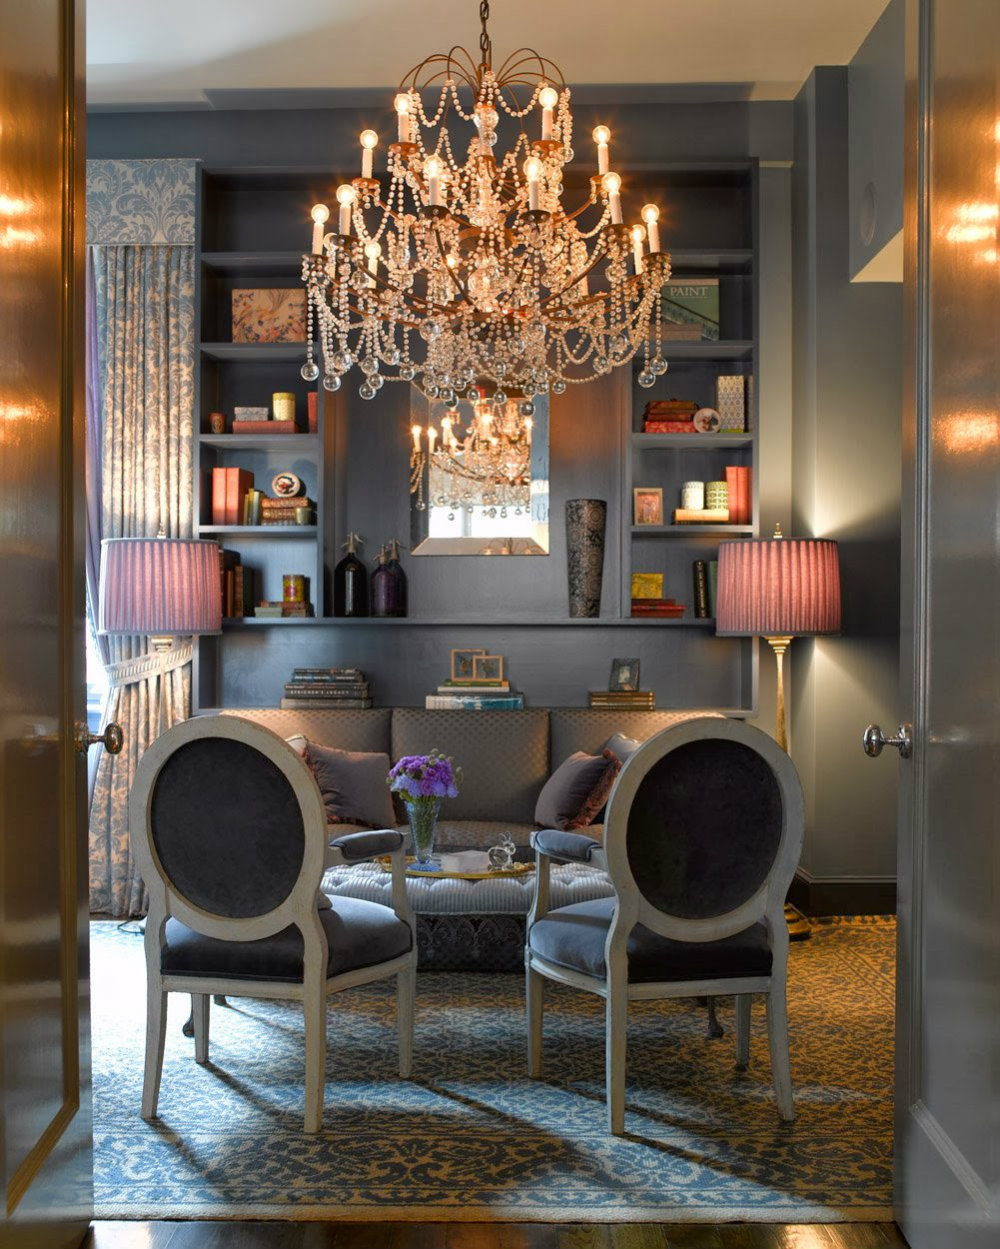 5 Crystal Chandeliers To Elevate Your Interiors 04